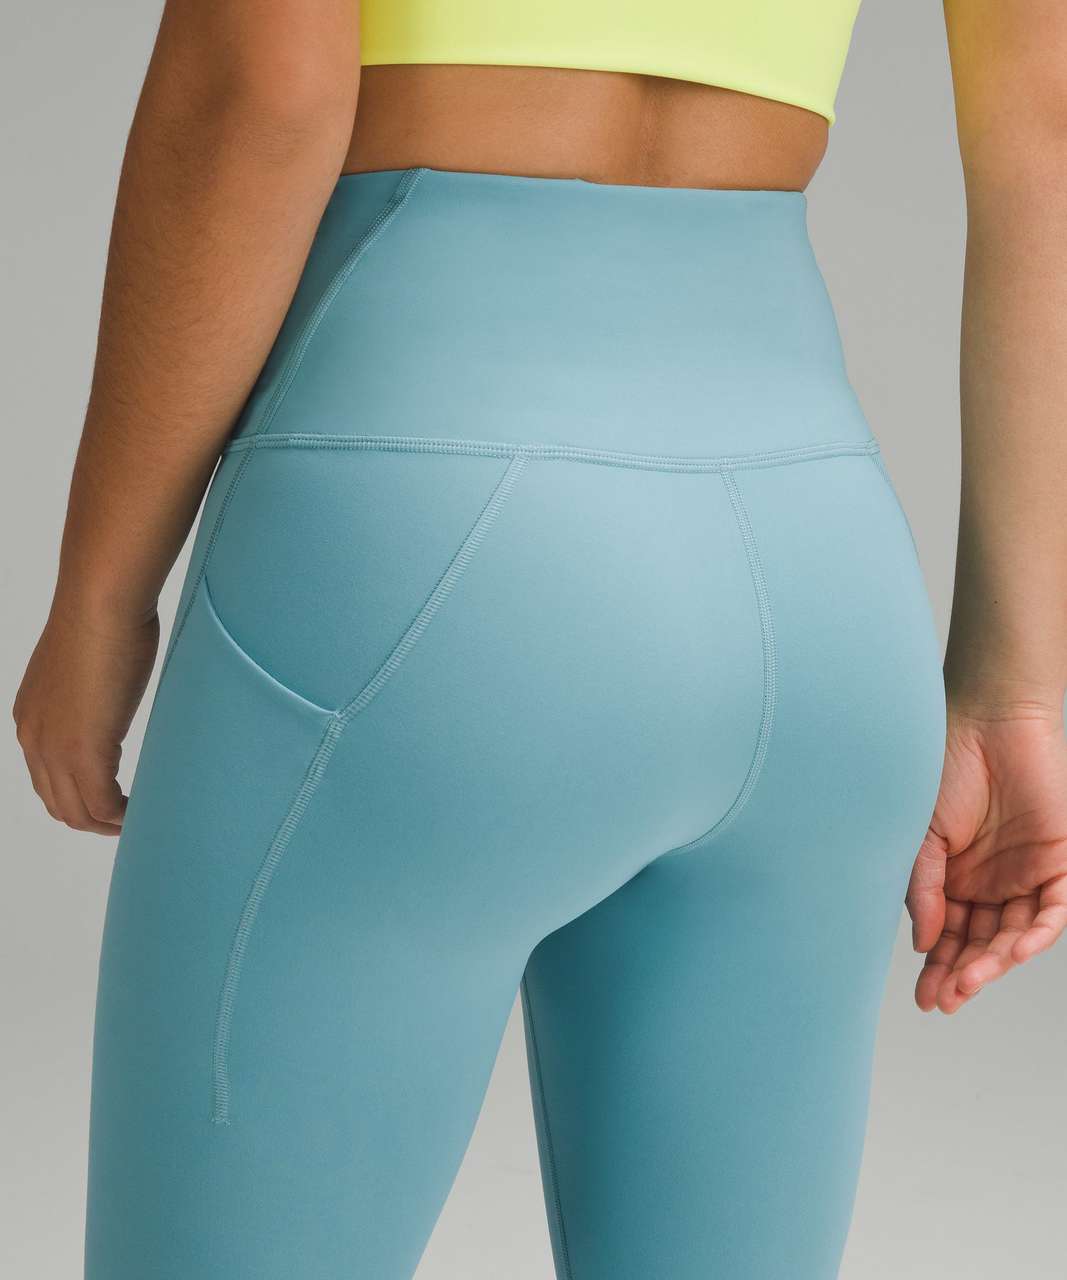 Lululemon Wunder Train High-Rise Tight with Pockets 25" - Tidal Teal